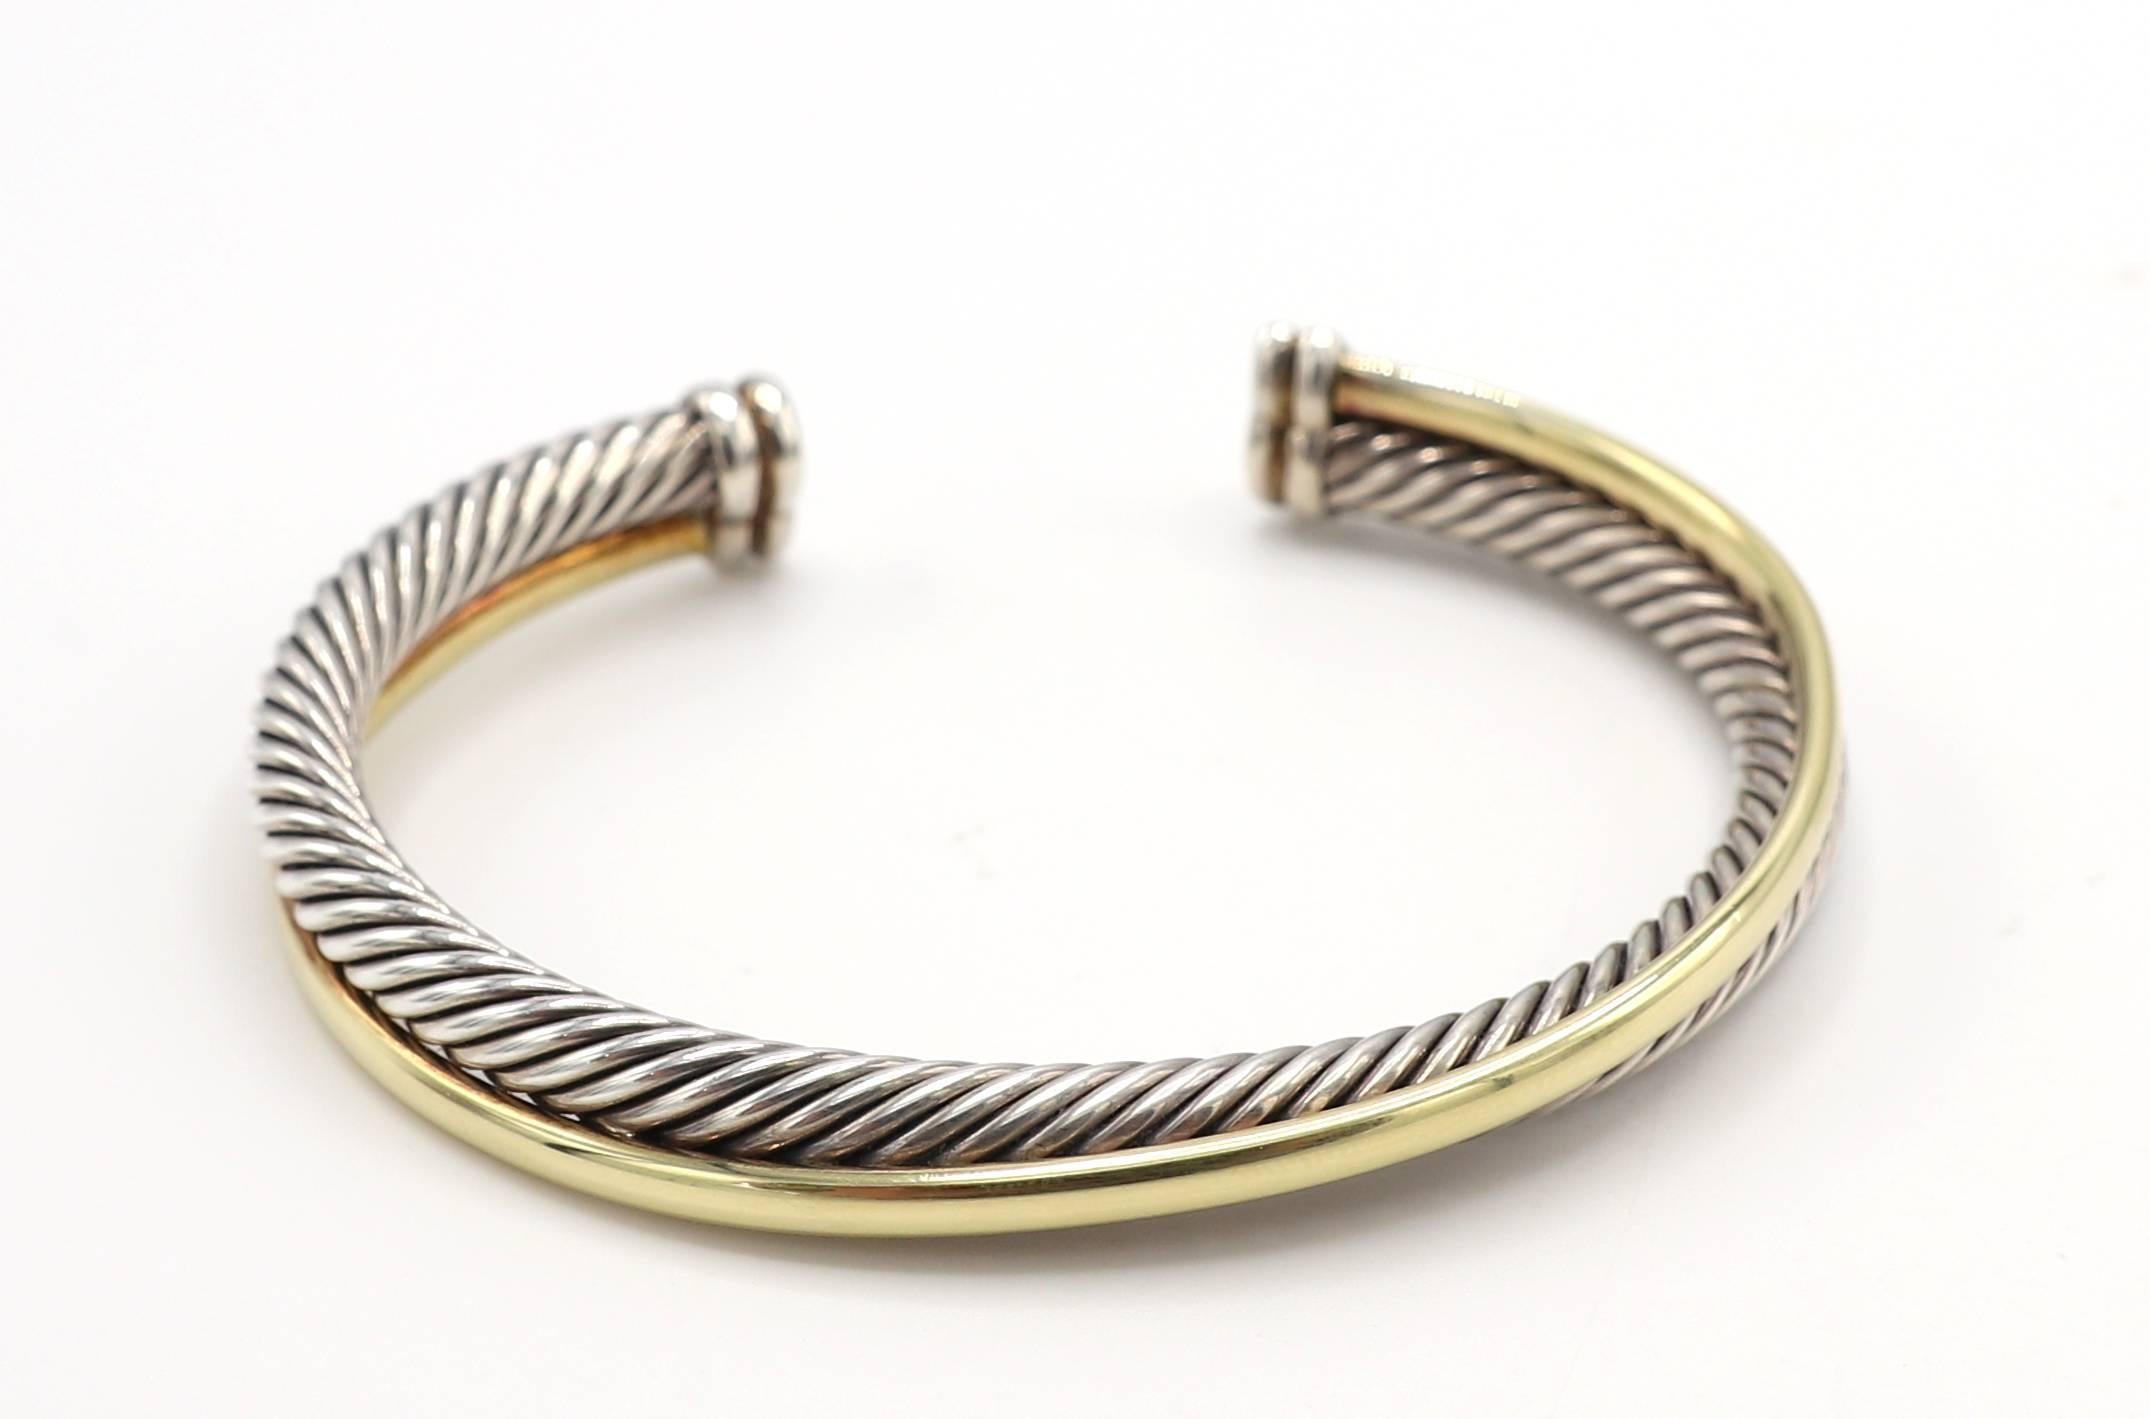 David Yurman Sterling & Gold Cable Crossover Cuff Bangle Bracelet 
Metal: Sterling silver & 18 karat yellow gold
Weight: 35.34 grams
Width: 5-8mm
Signed: D.Y. 750 925
Retail: $1,250

